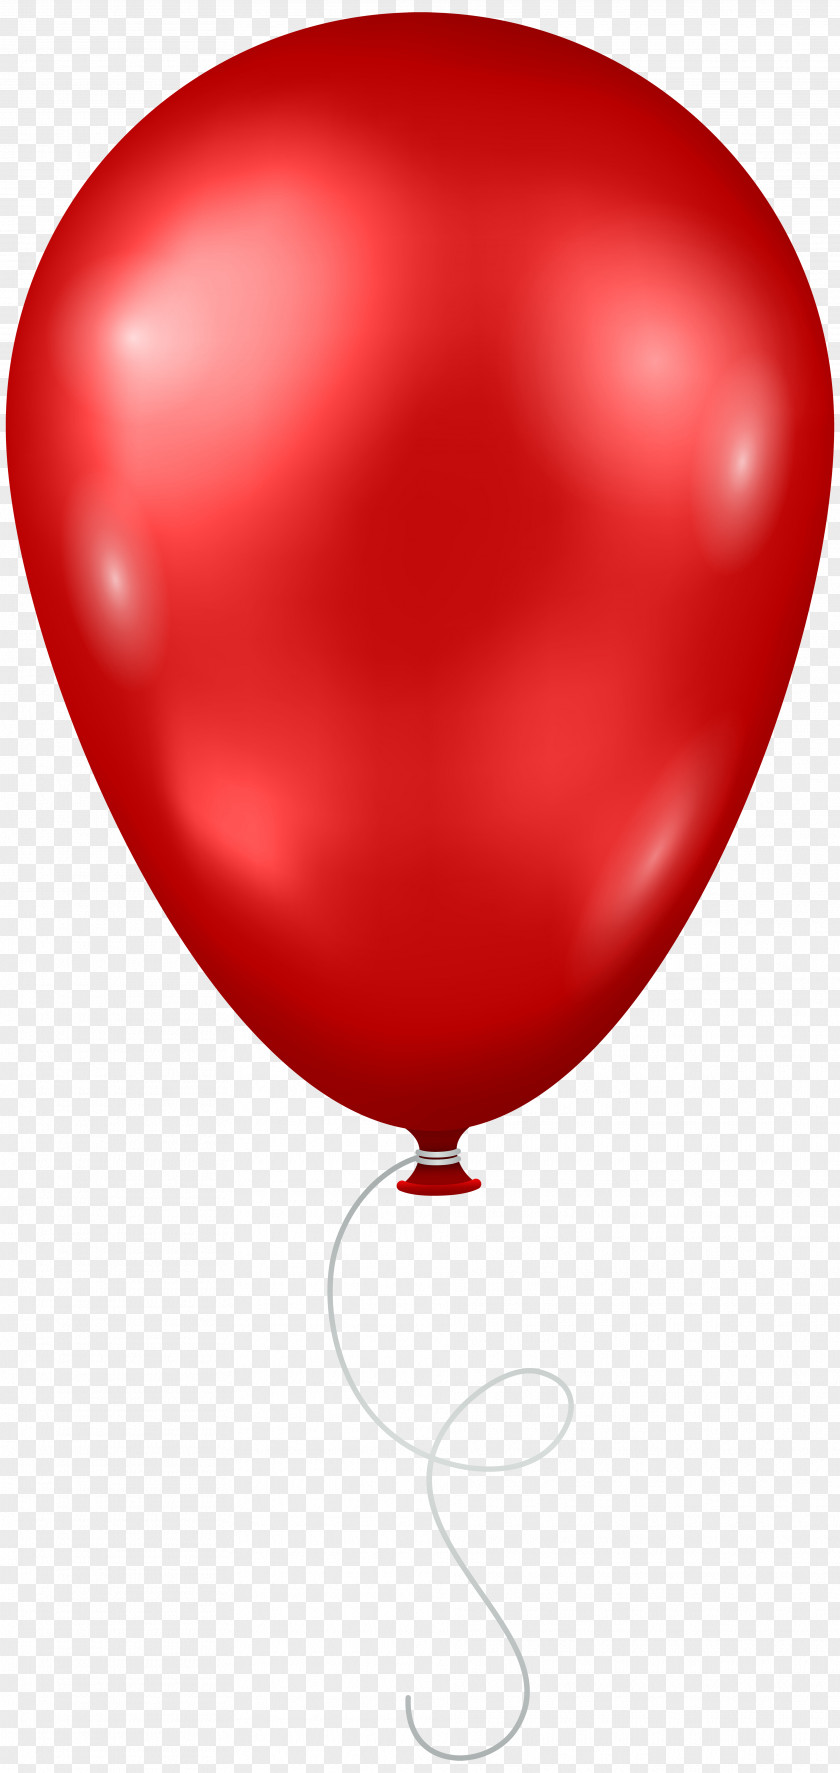 Red Balloon Transparent Clip Art Image File Formats Lossless Compression PNG